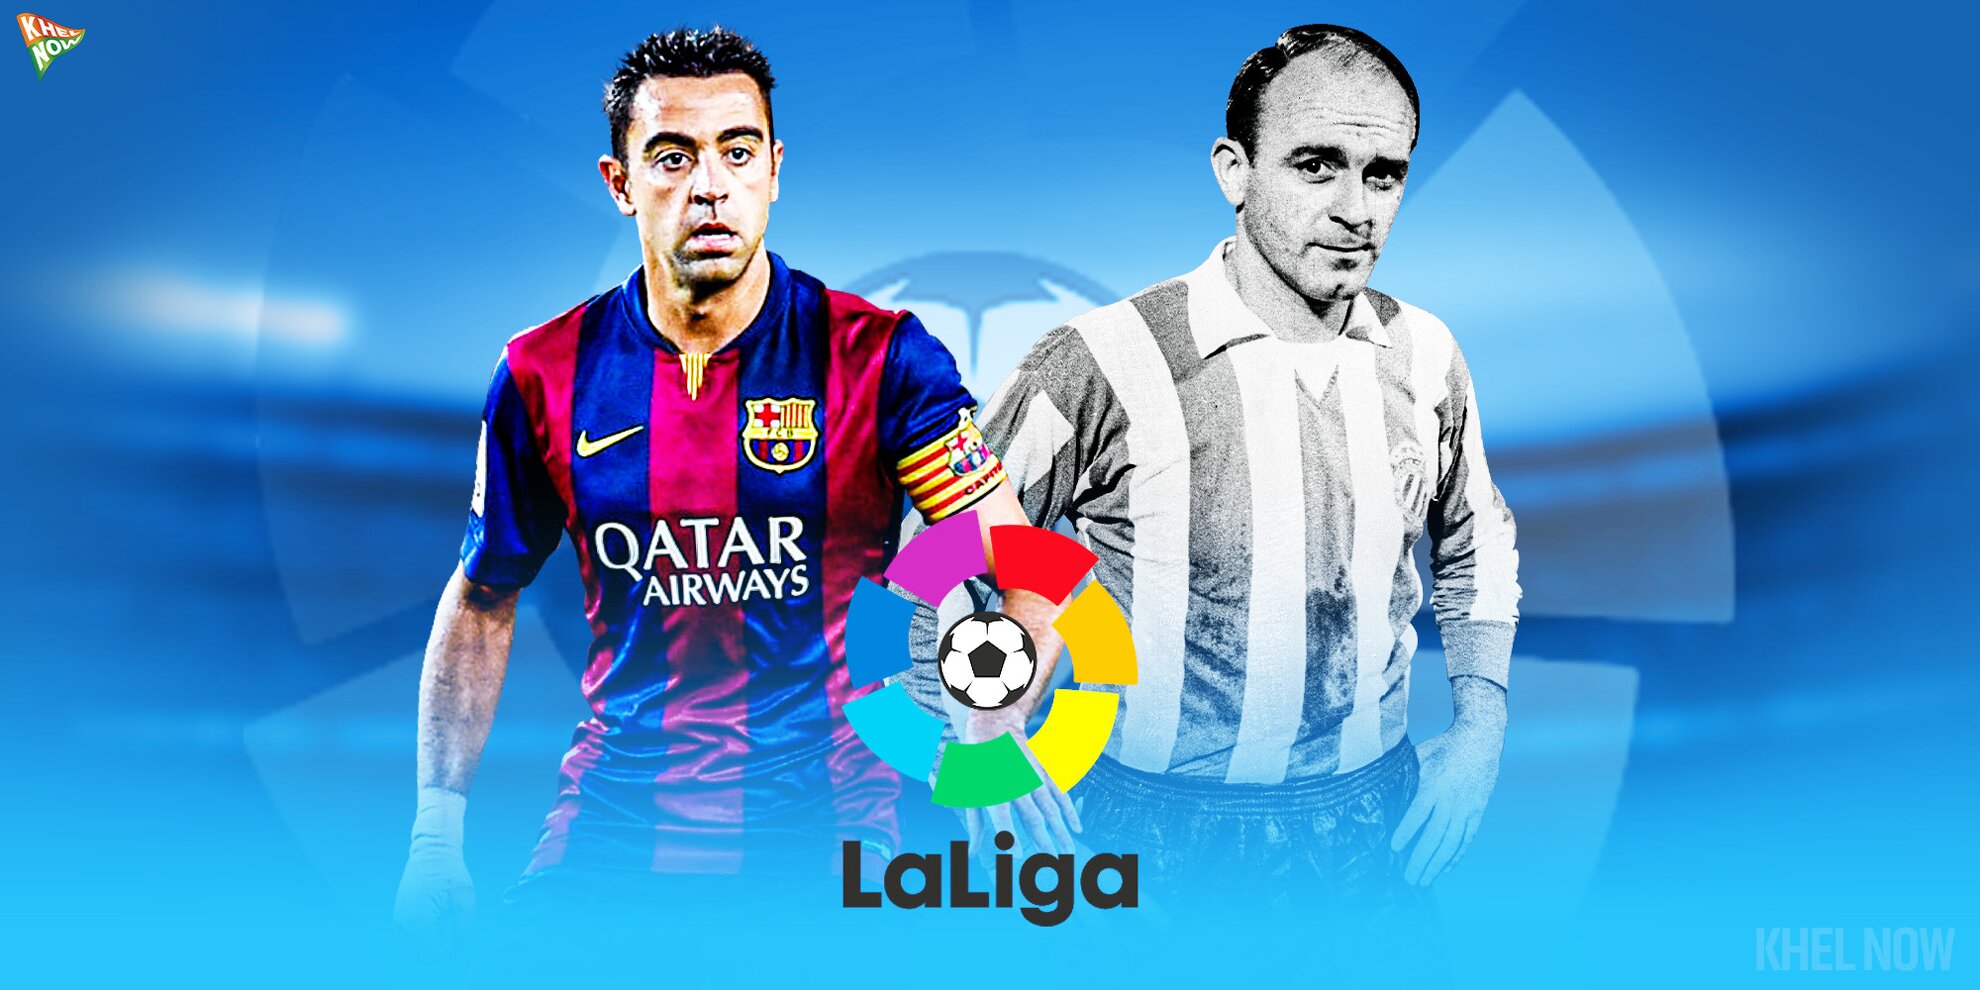 Top 15 greatest players in the history of LaLiga